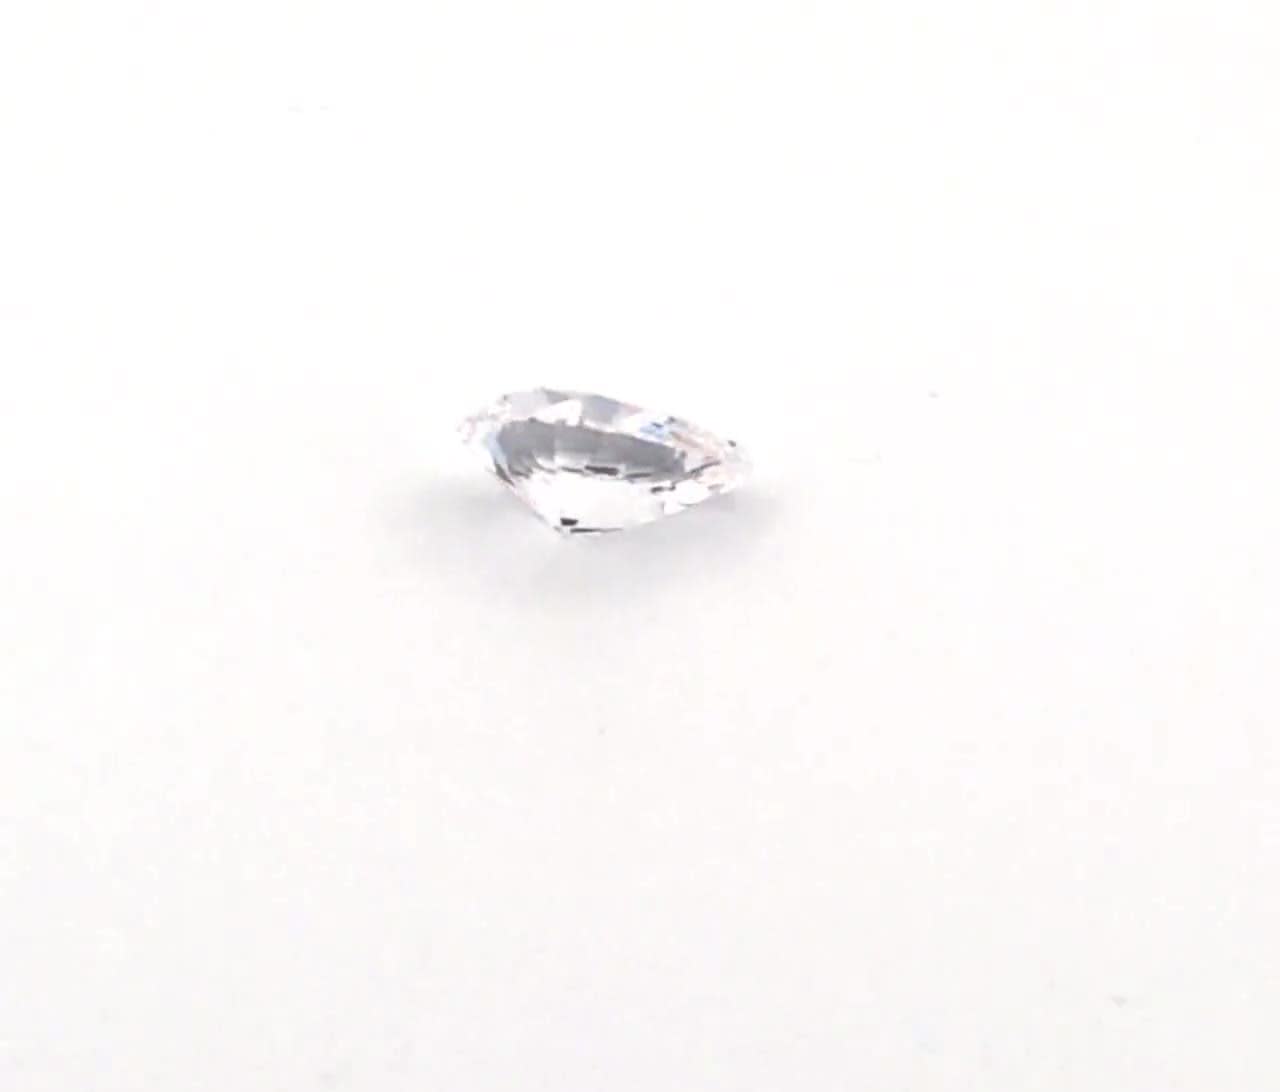 Cubic Zirconia CZ Gemstone Loose for Metal Clay PMC and Prong Setting -   Canada